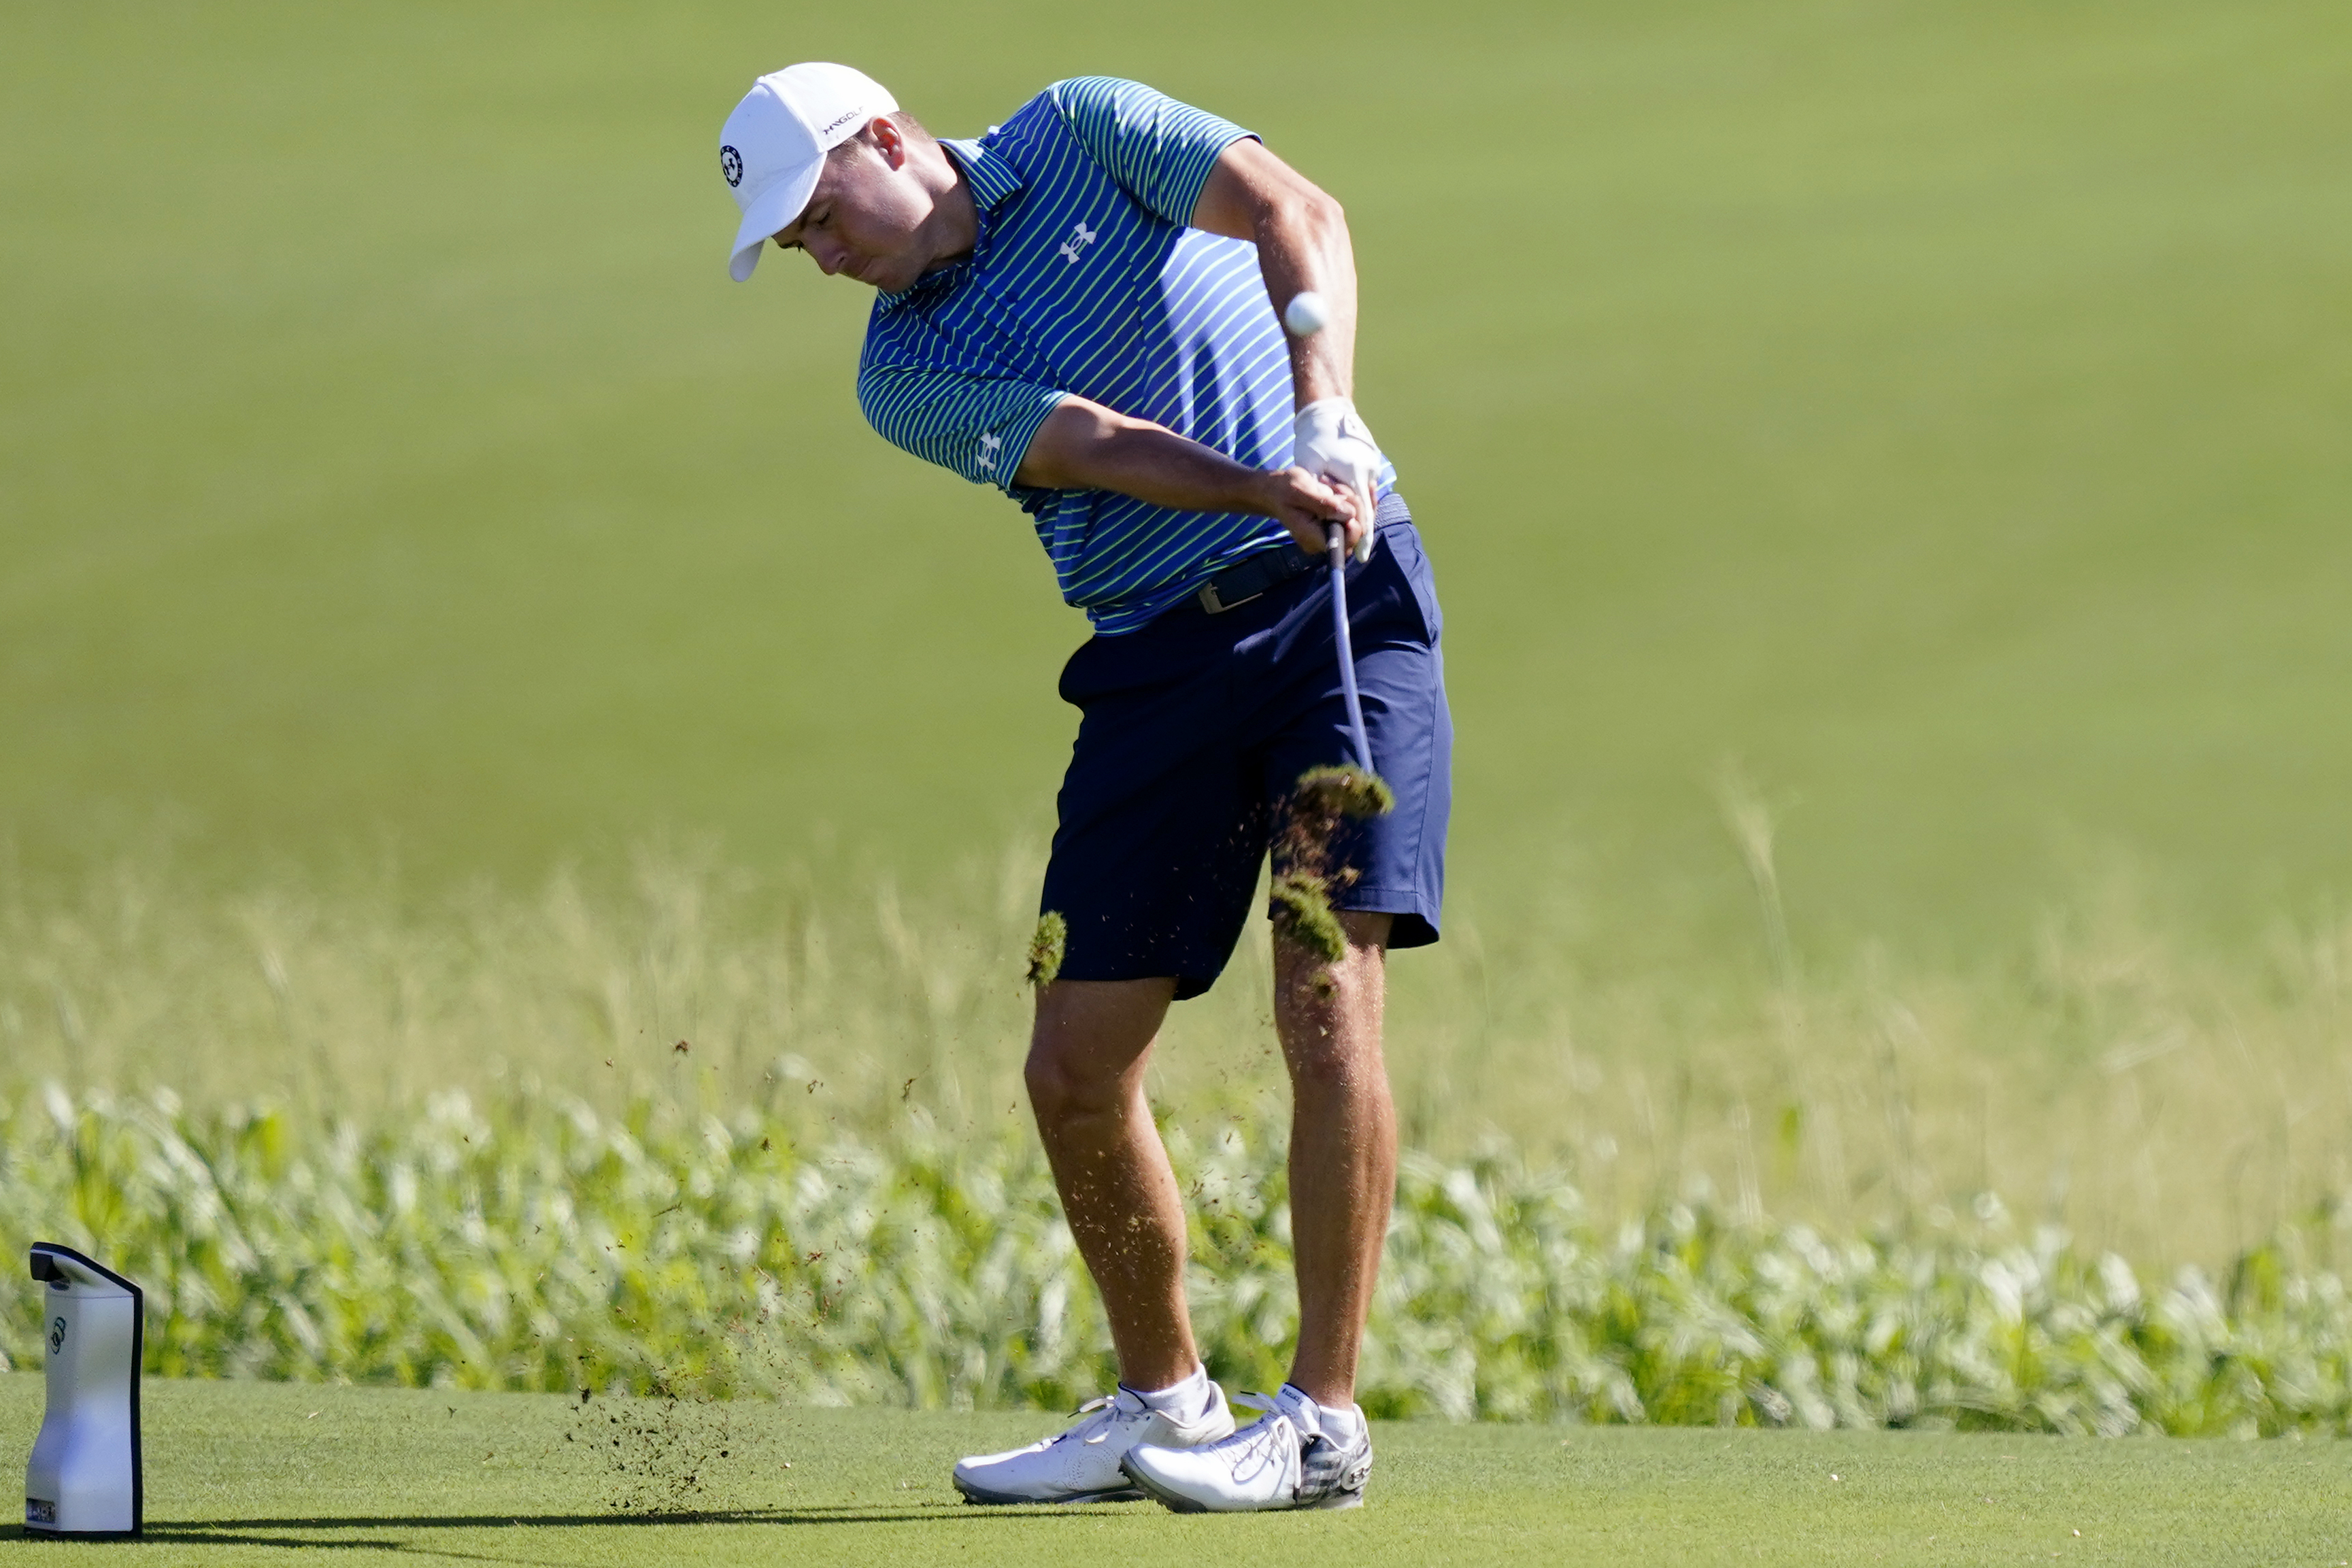 Jordan Spieth to defend 2021 title at 100th anniversary of Valero Texas Open